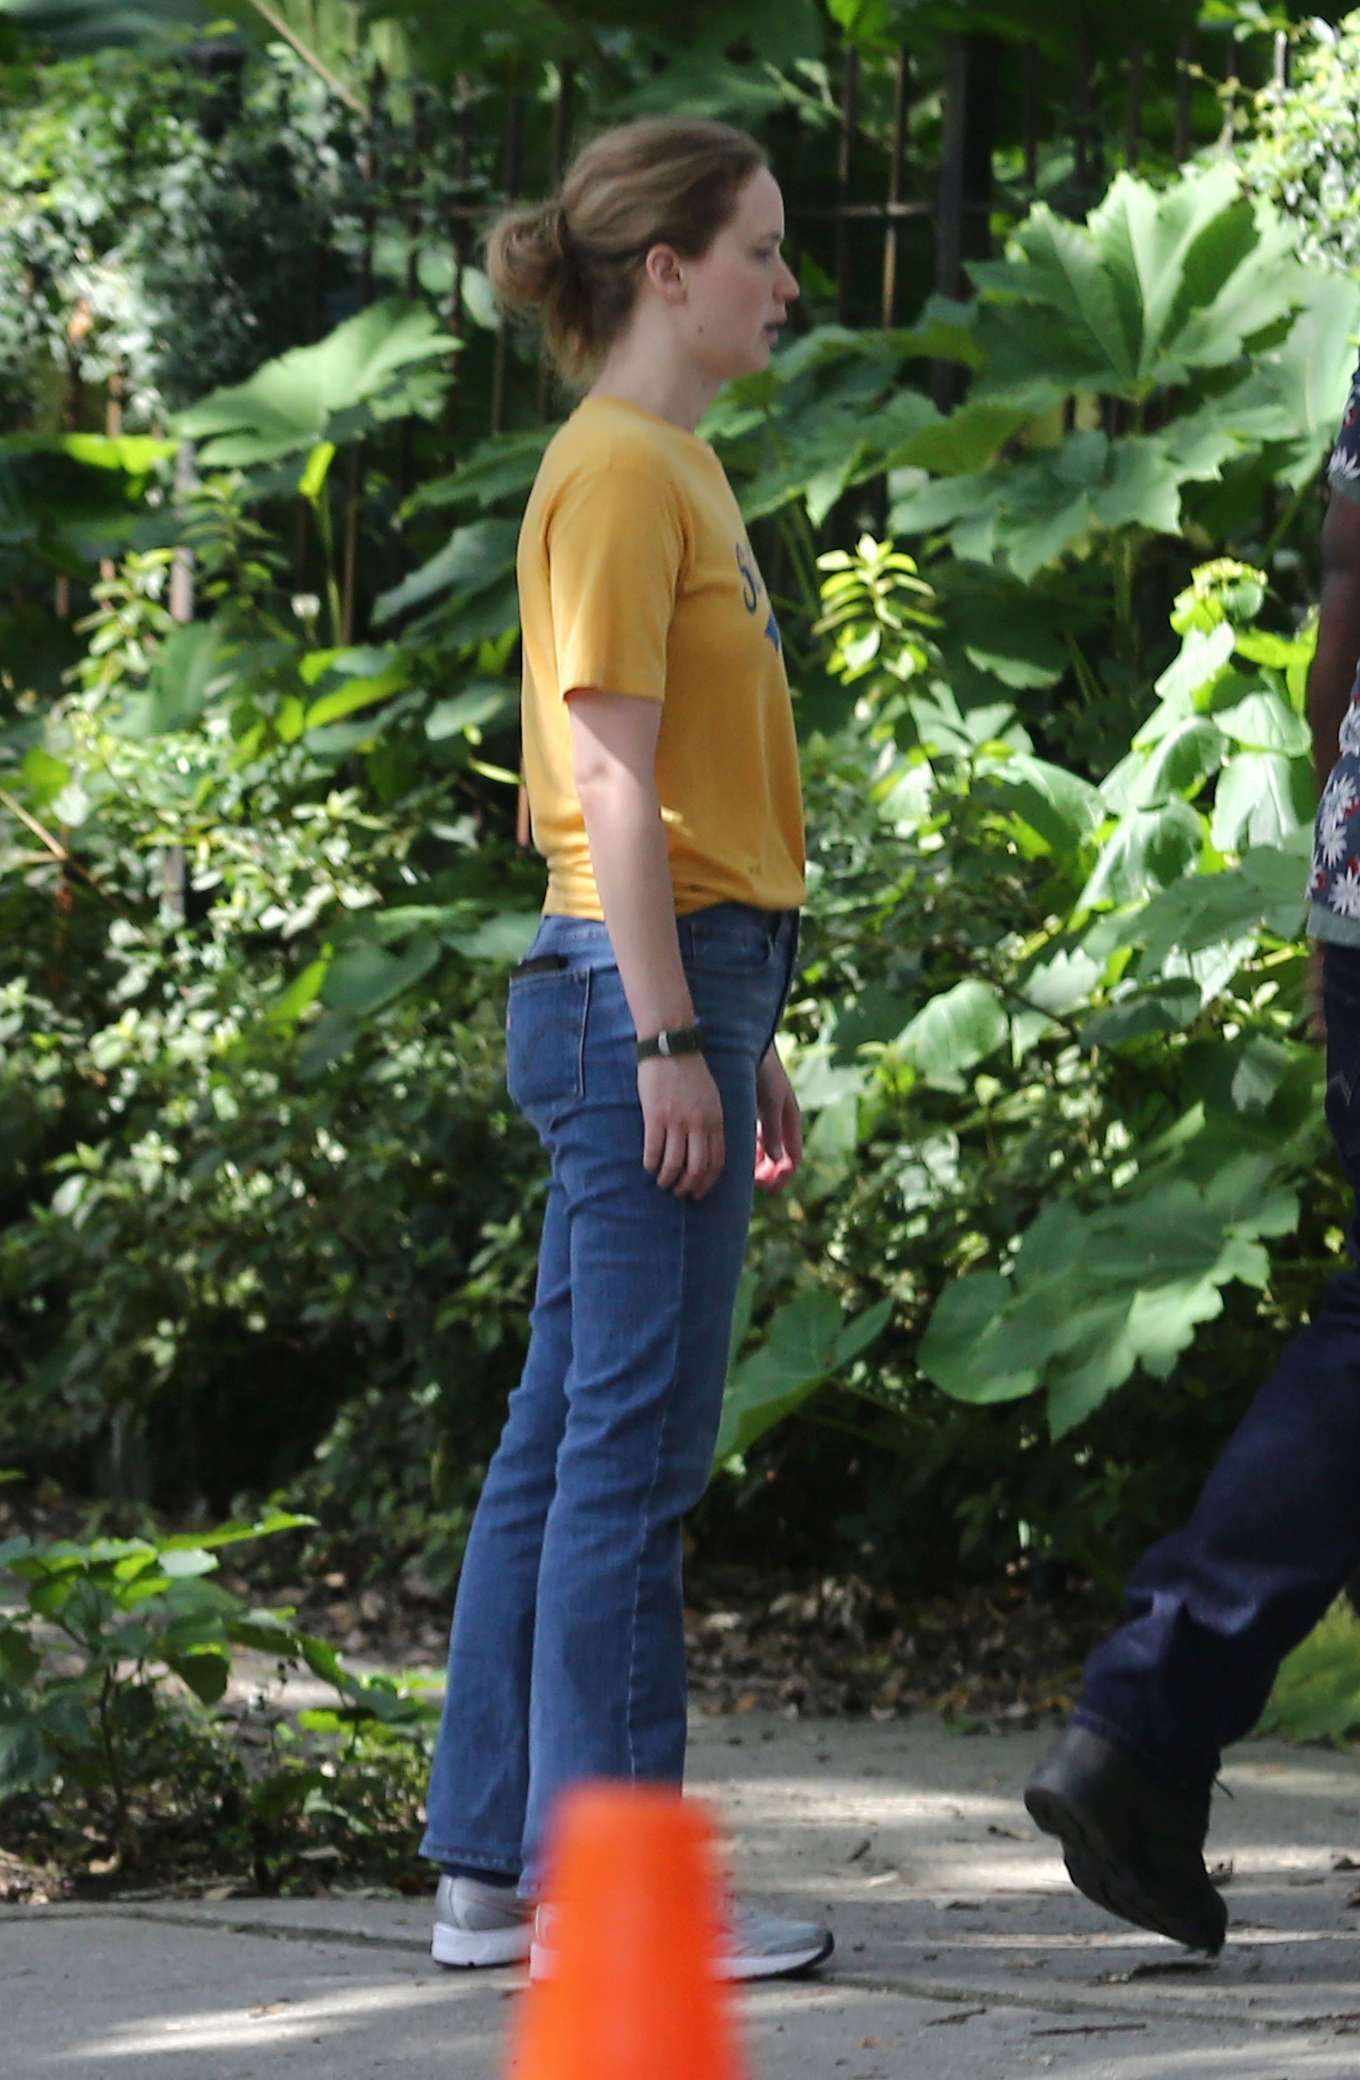 Jennifer Lawrence â€“ Filming scenes for â€˜The Untitled Soldier Projectâ€™ in New Orleans